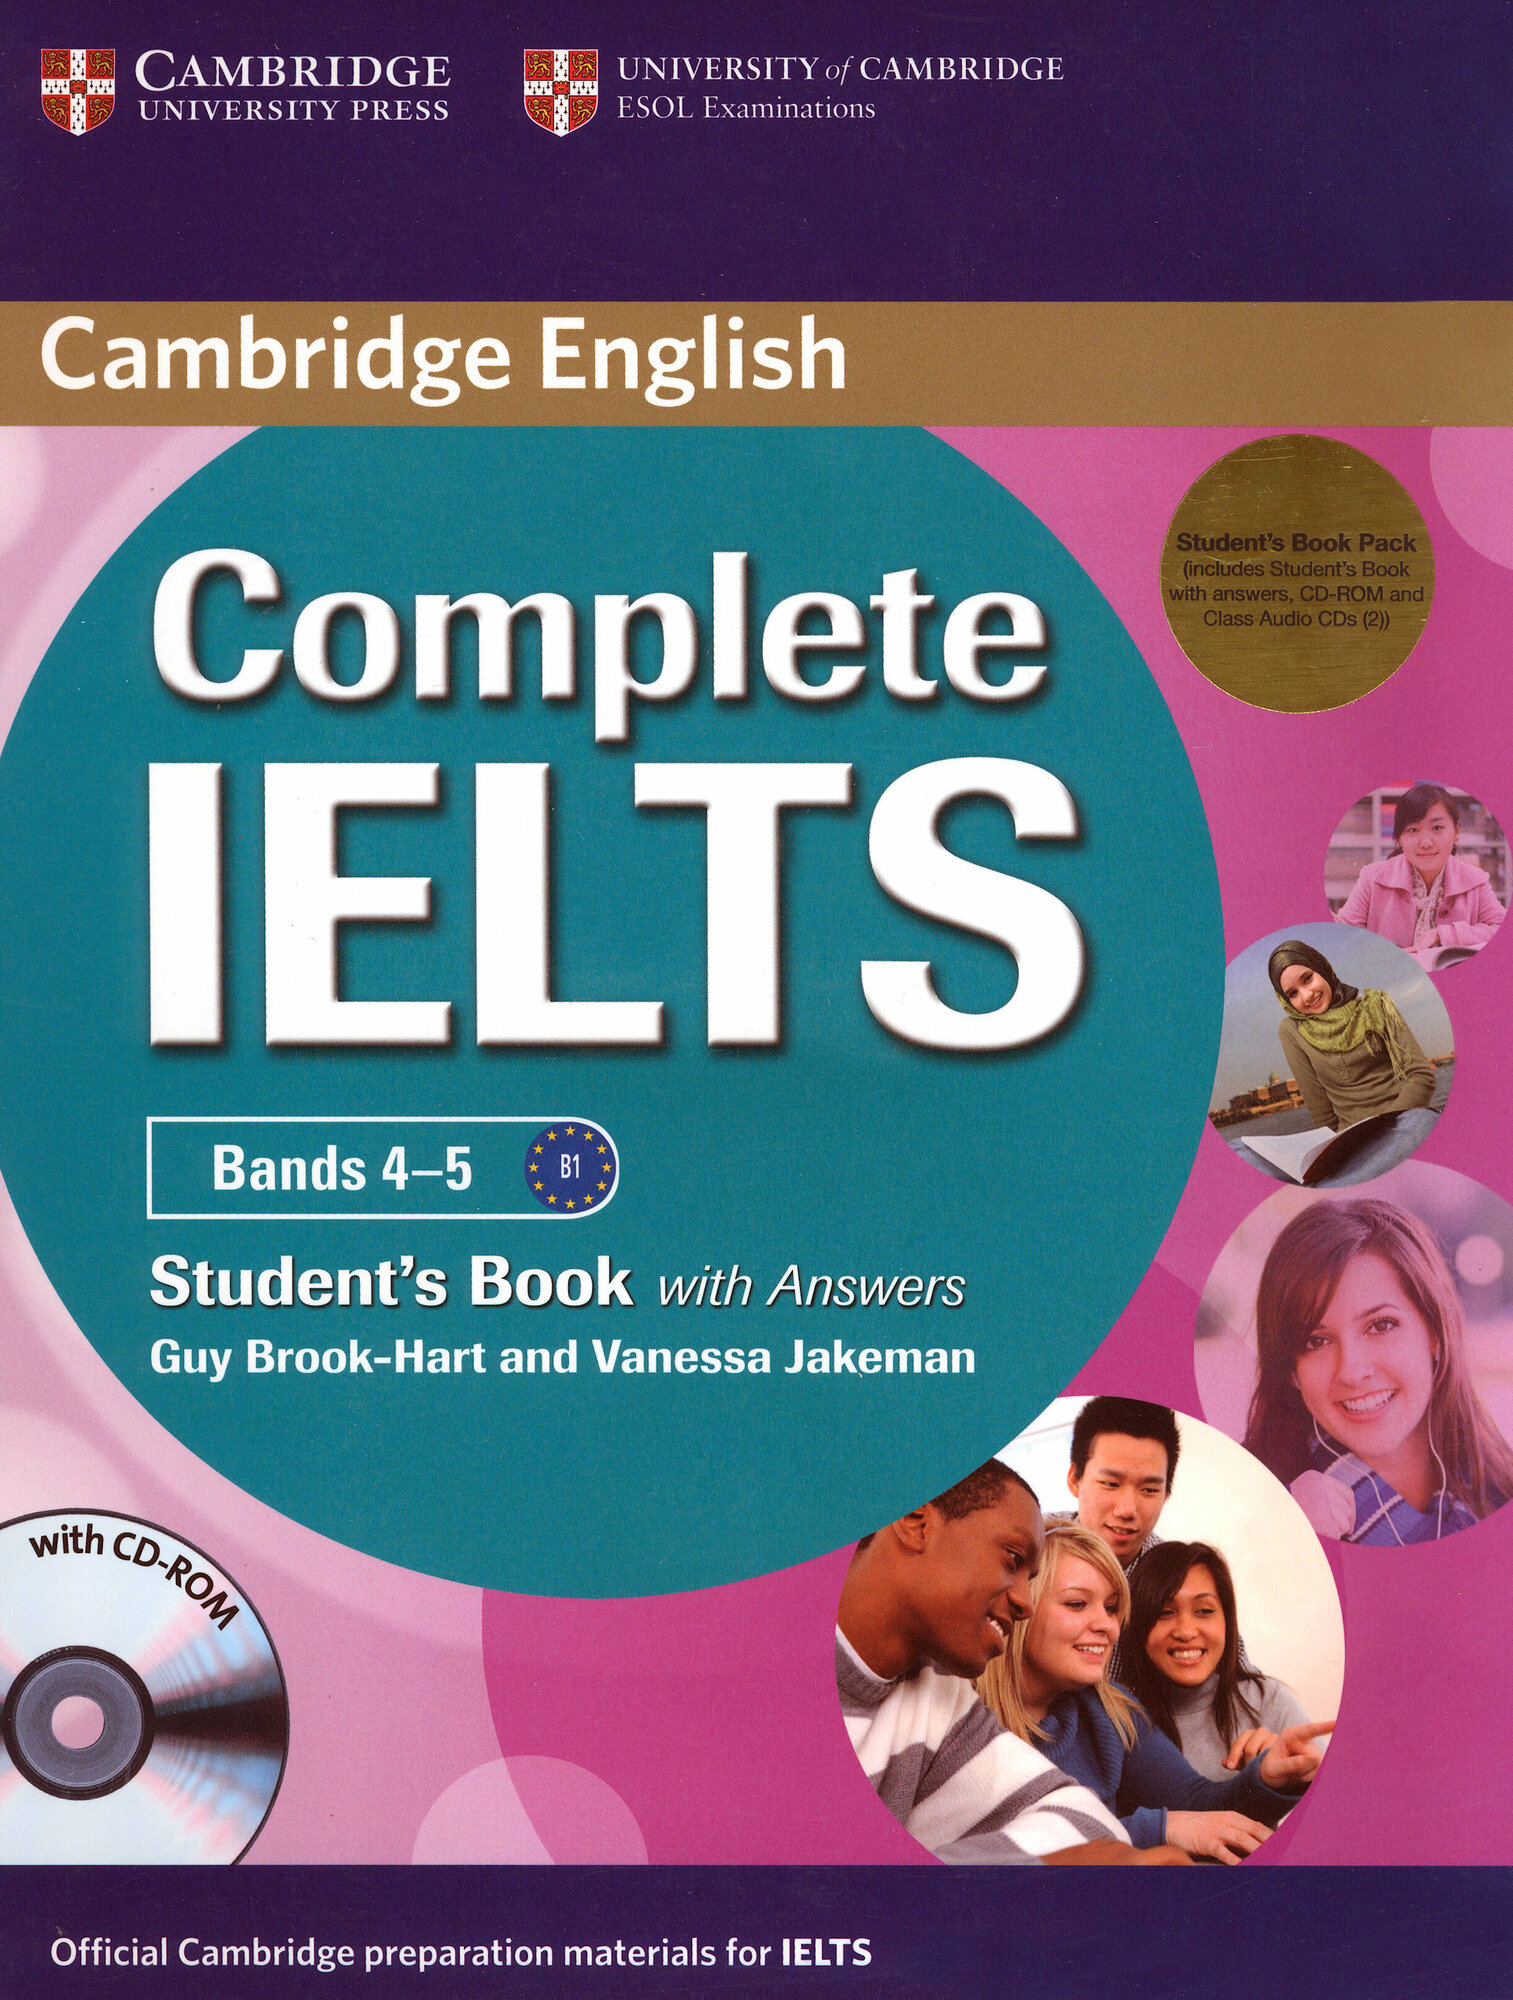 Complete IELTS. Bands 4-5. Student's Pack. Student's Book with Answers with CD and 2 Class Audio CDs / Мультимедиа